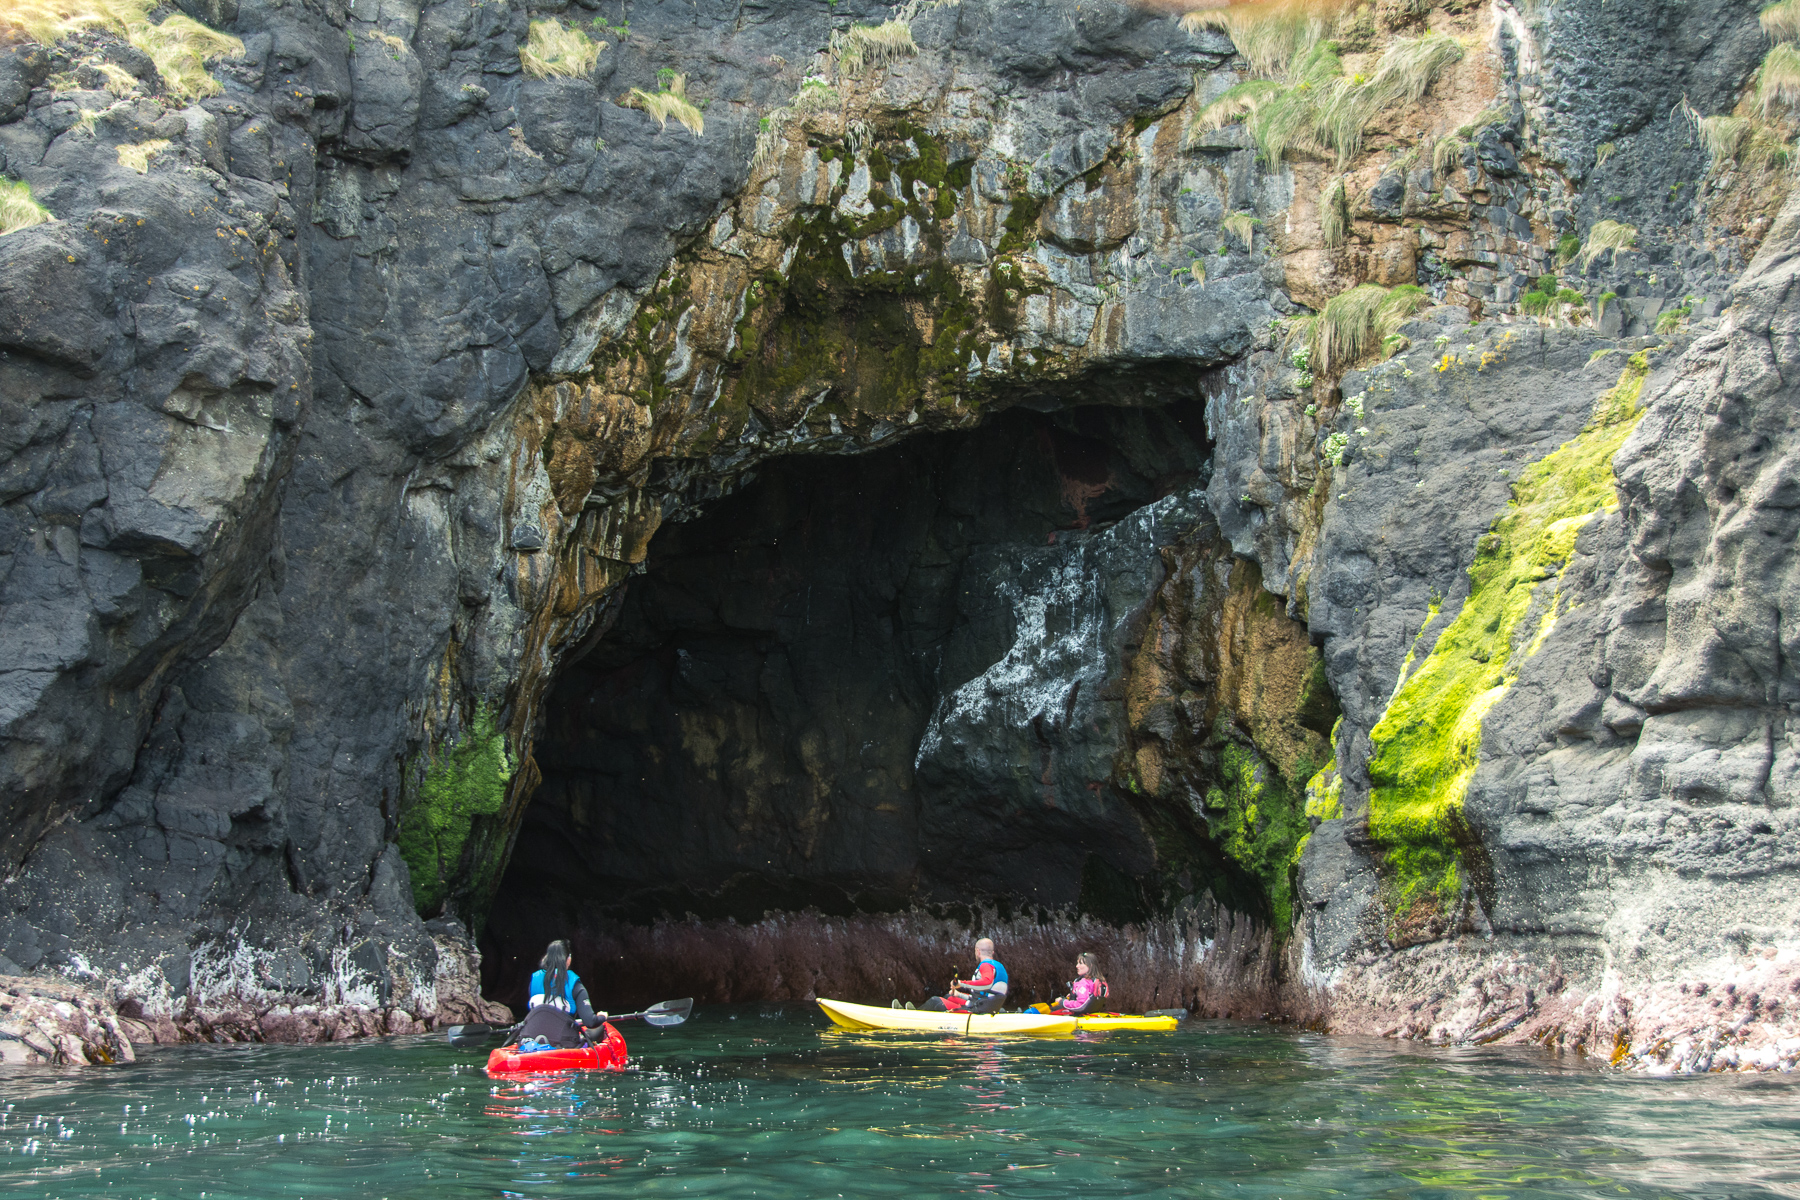 Kayaking Tours Northern Ireland by Bout Yeh photographers - photo 7808